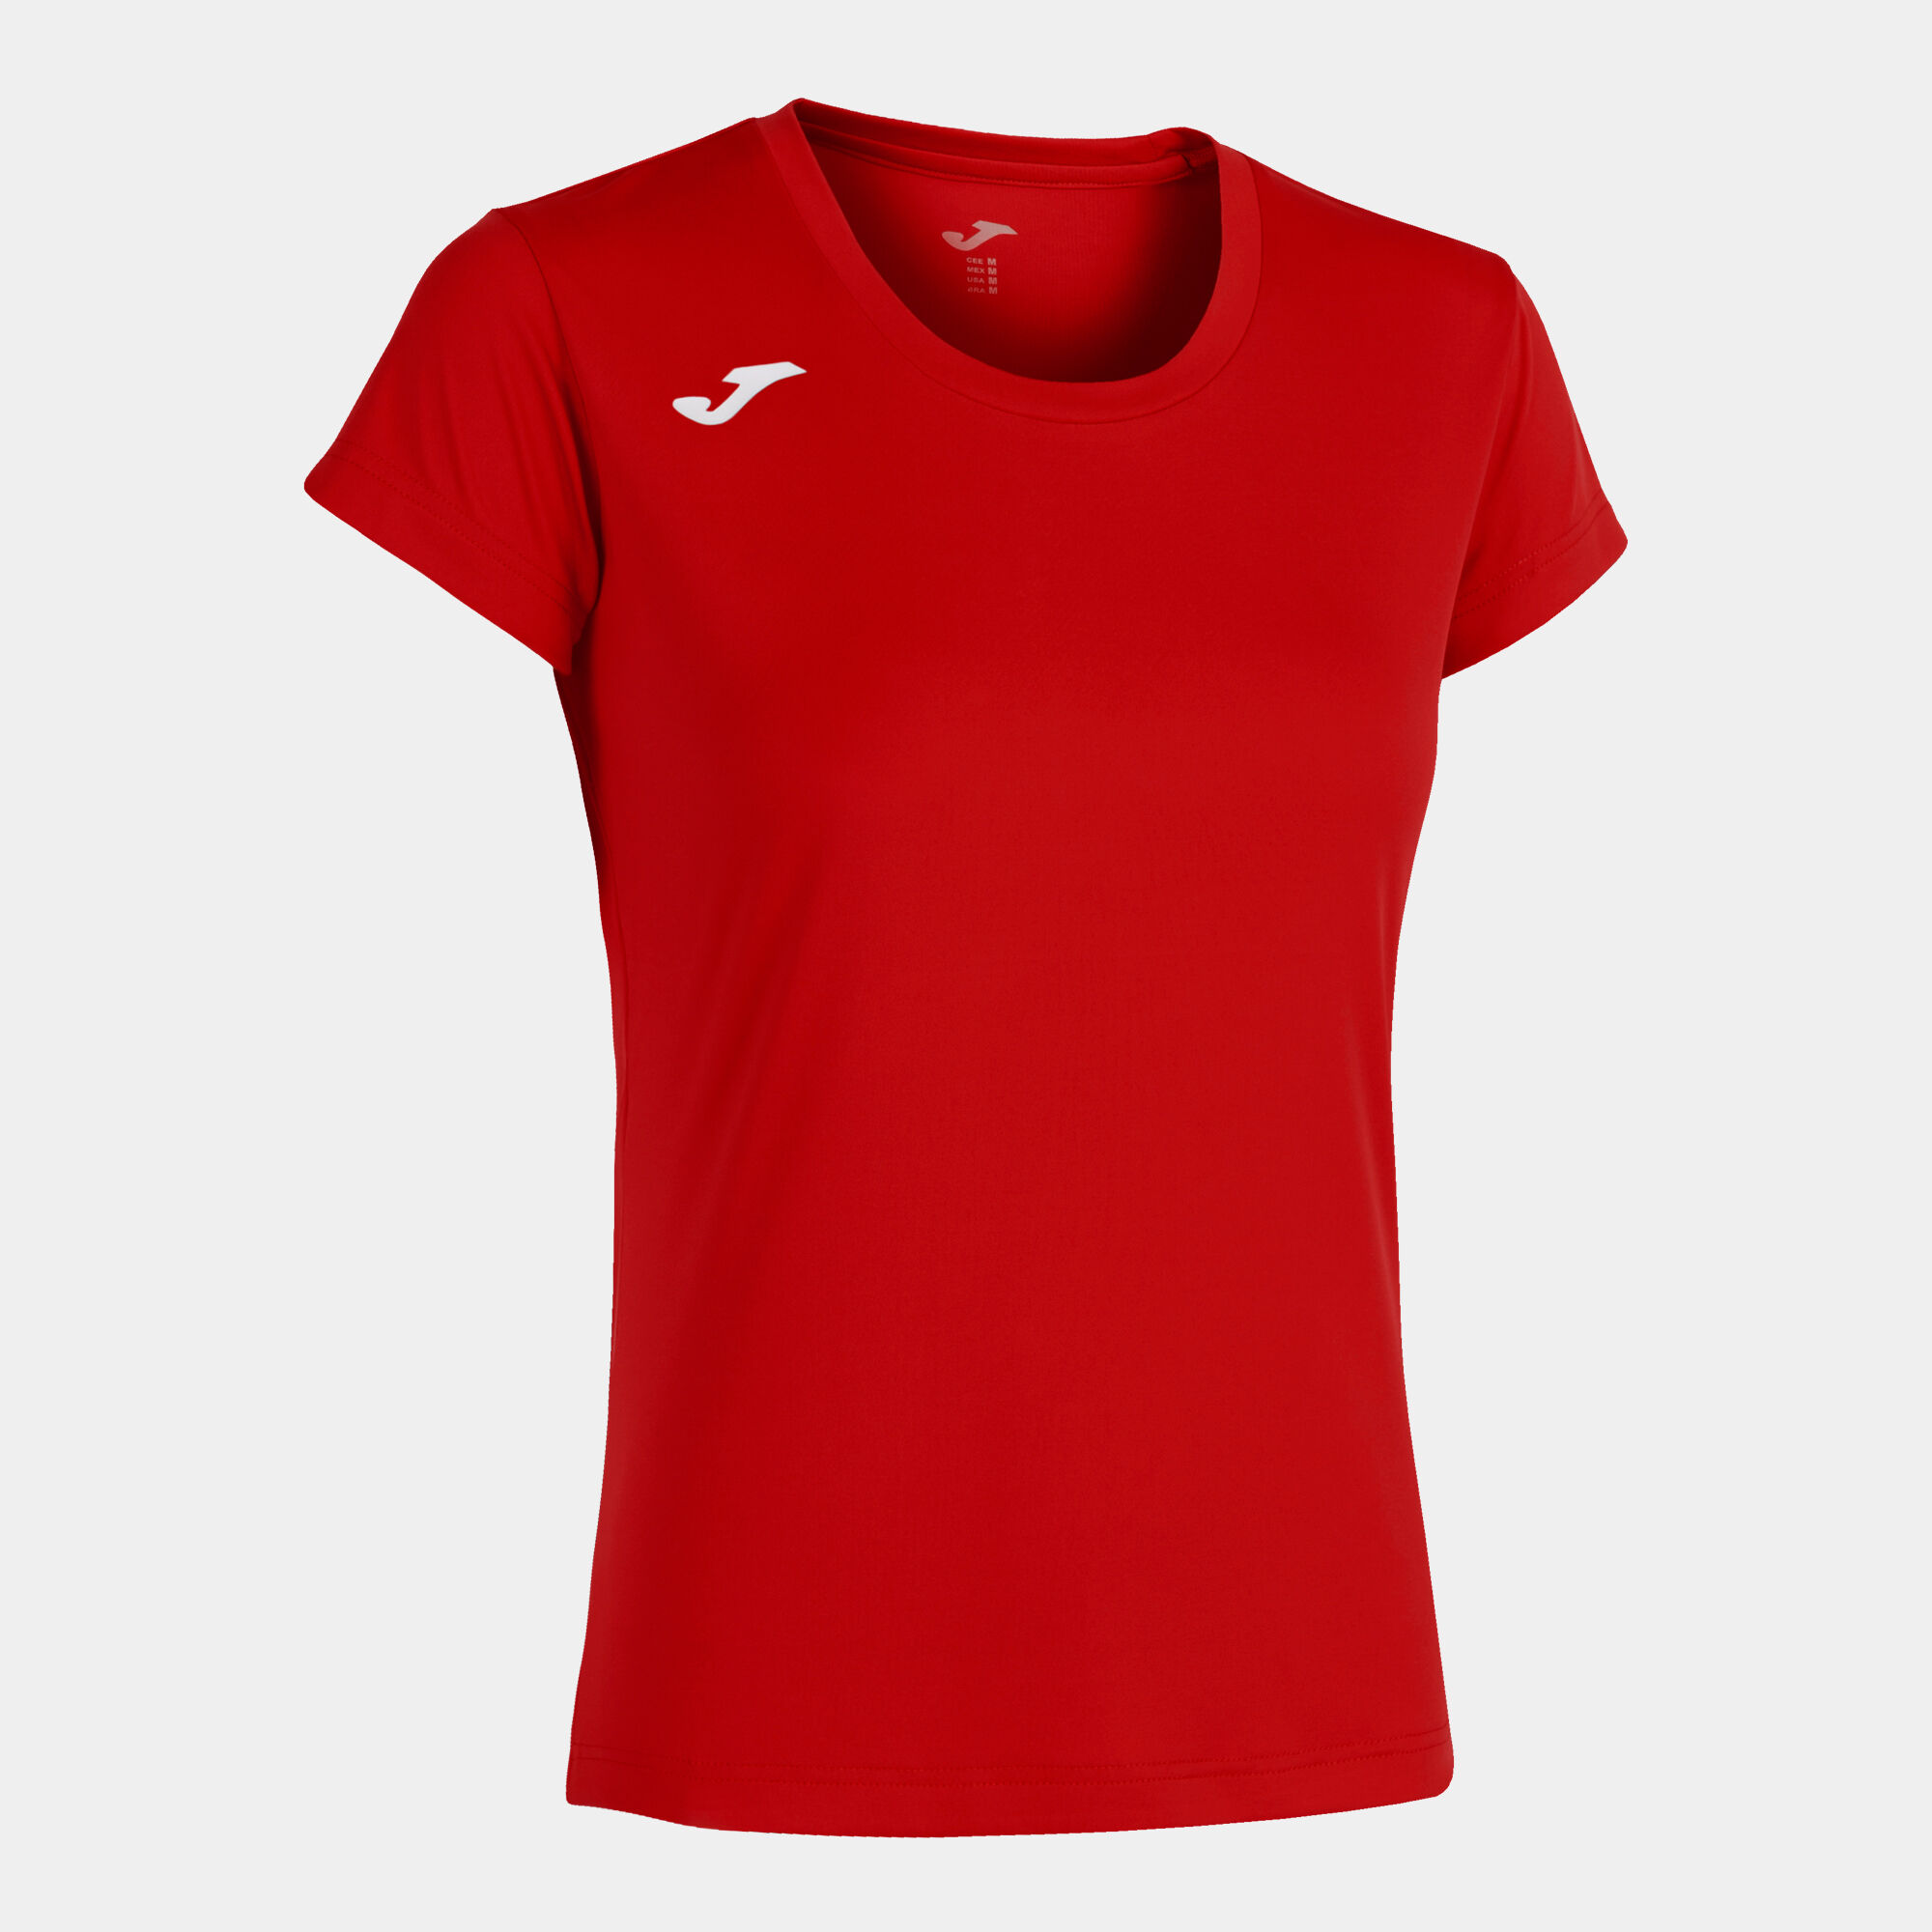 MAILLOT MANCHES COURTES FEMME RECORD II ROUGE